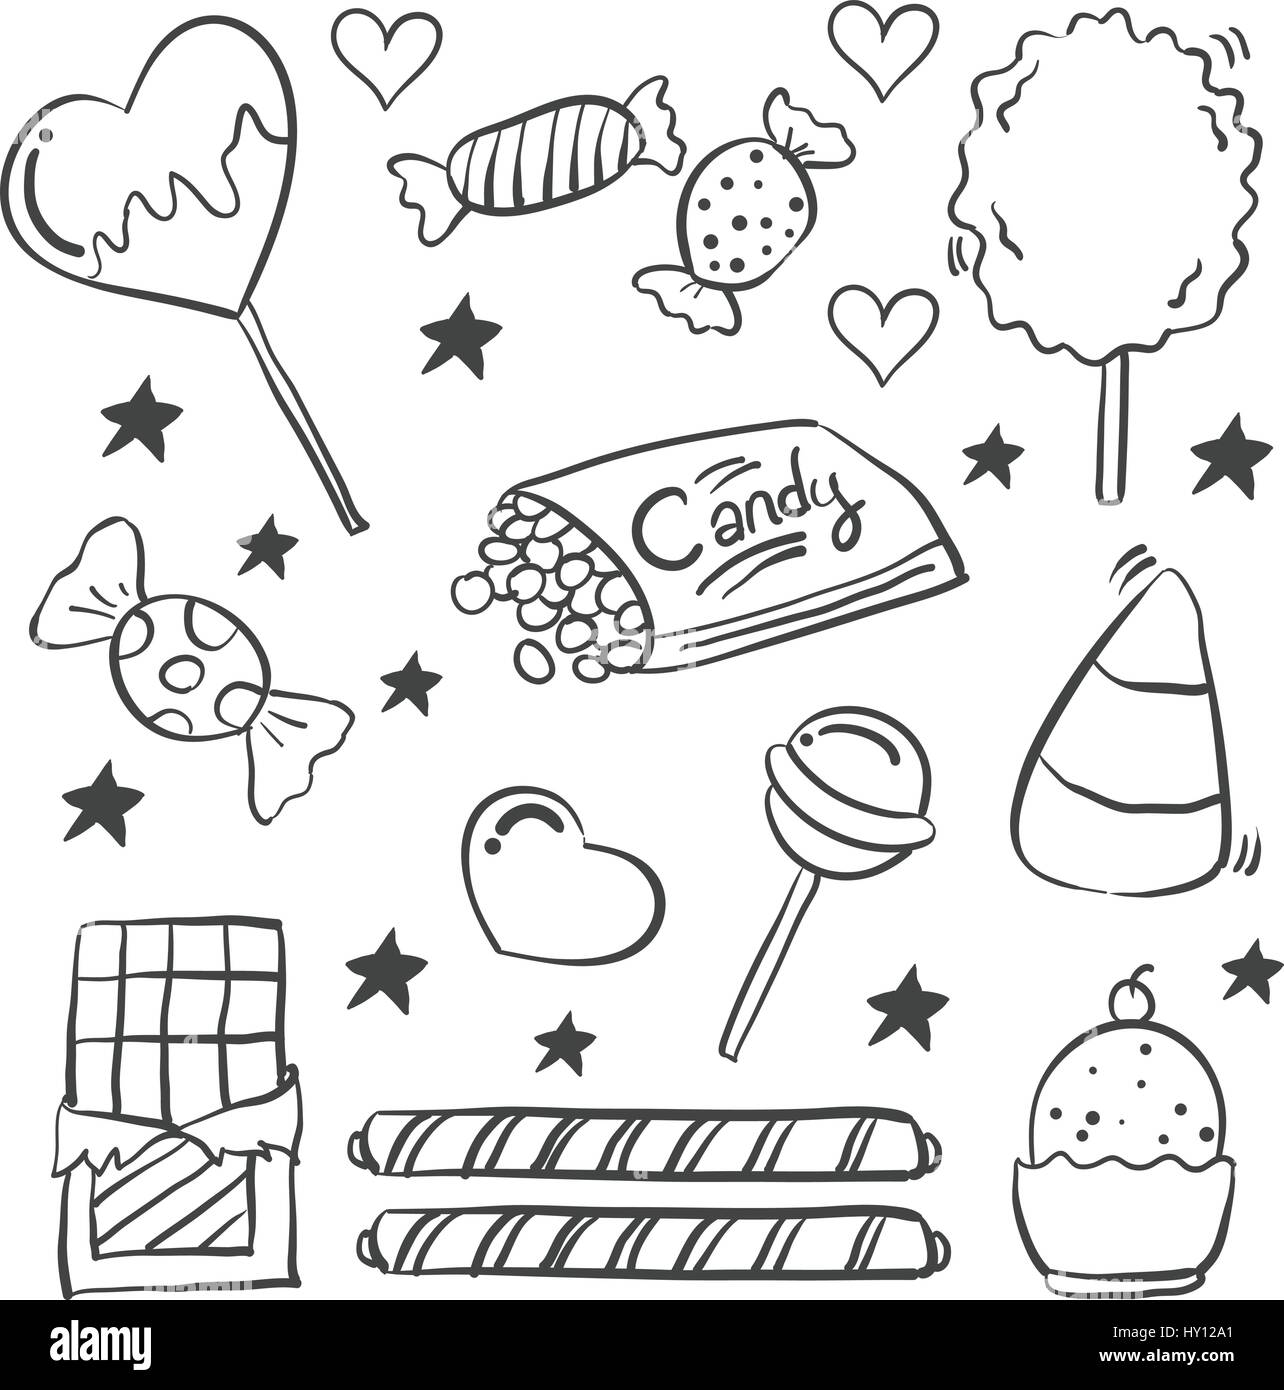 Candy Line Drawing Stock Illustrations – 12,311 Candy Line Drawing Stock  Illustrations, Vectors & Clipart - Dreamstime